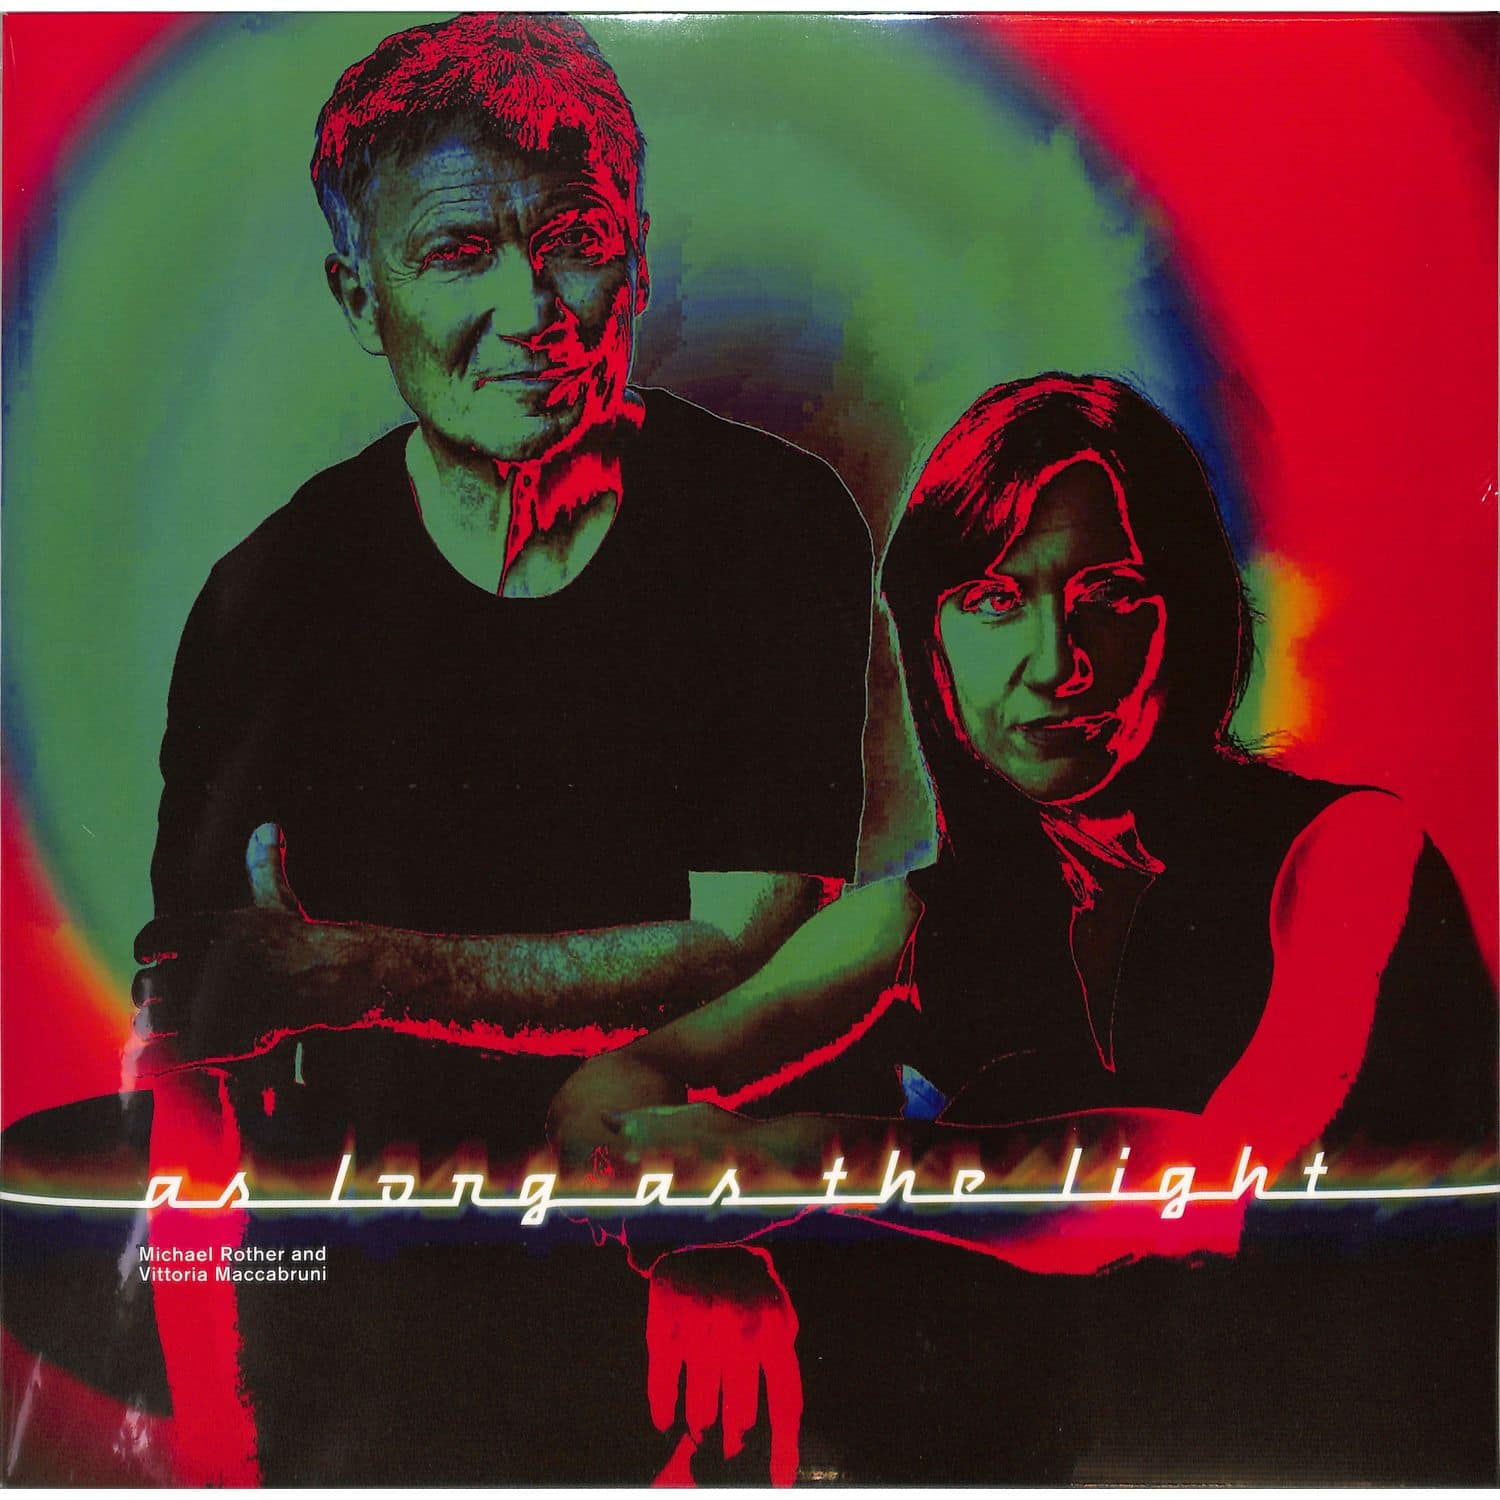 Michael Rother / Vittoria Maccabruni - AS LONG AS THE LIGHT 